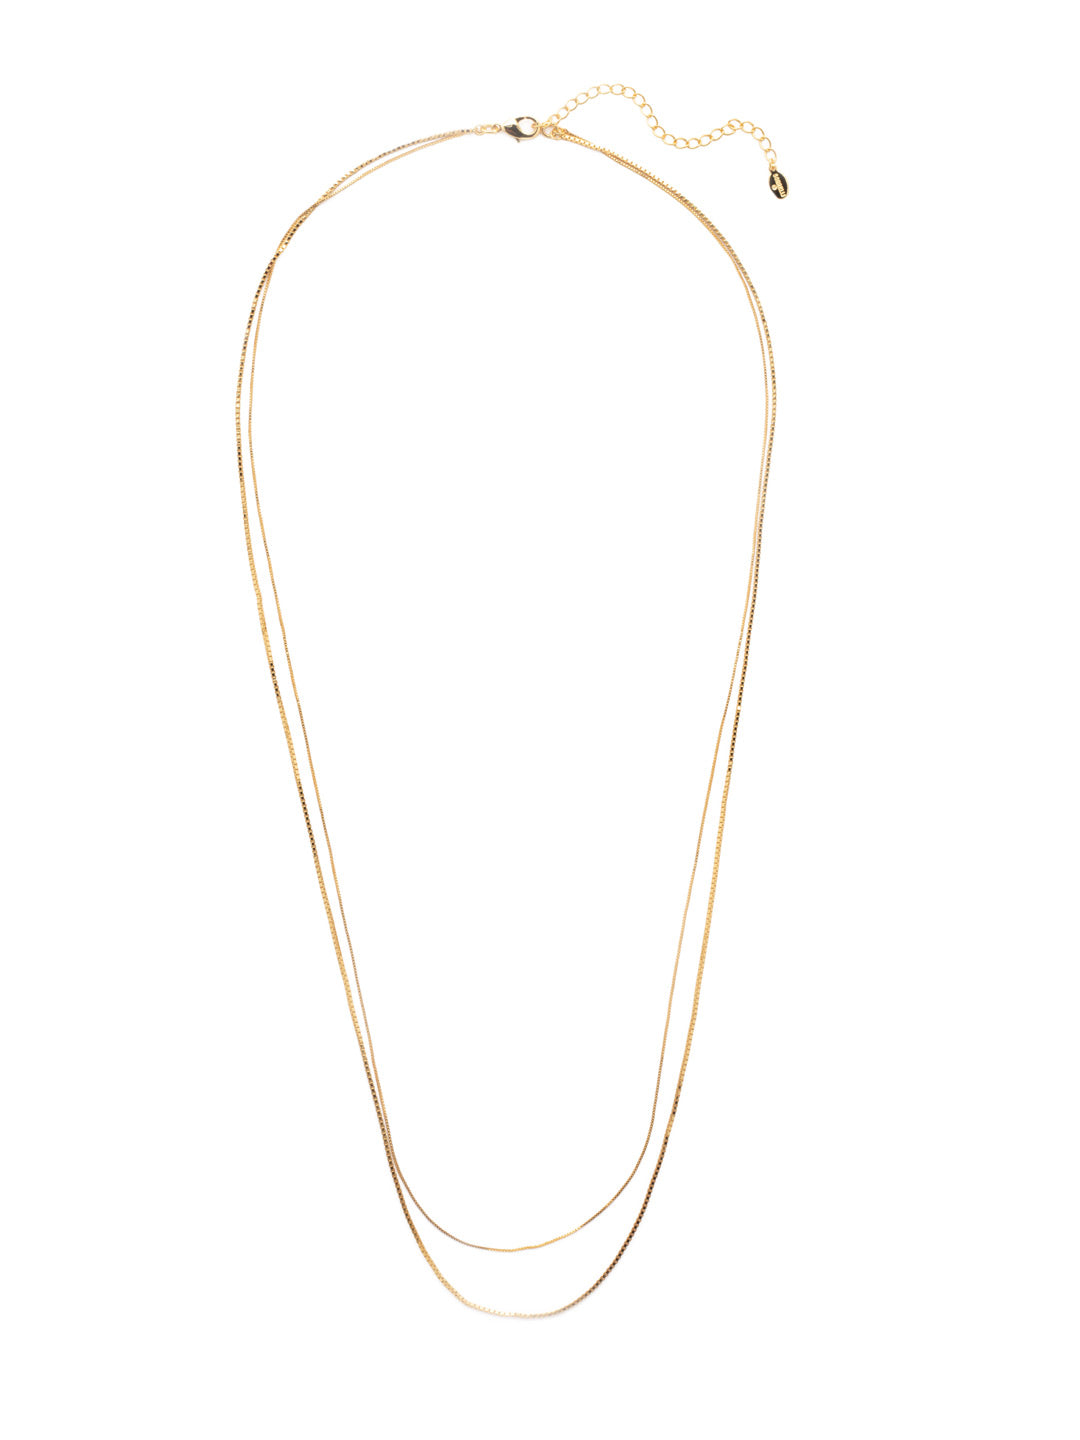 Alexandra Layered Necklace - 4NEV11BGMTL - <p>Two delicate chains lay together to create an effortless layered look with the Alexandra Layered Necklace From Sorrelli's Bare Metallic collection in our Bright Gold-tone finish.</p>